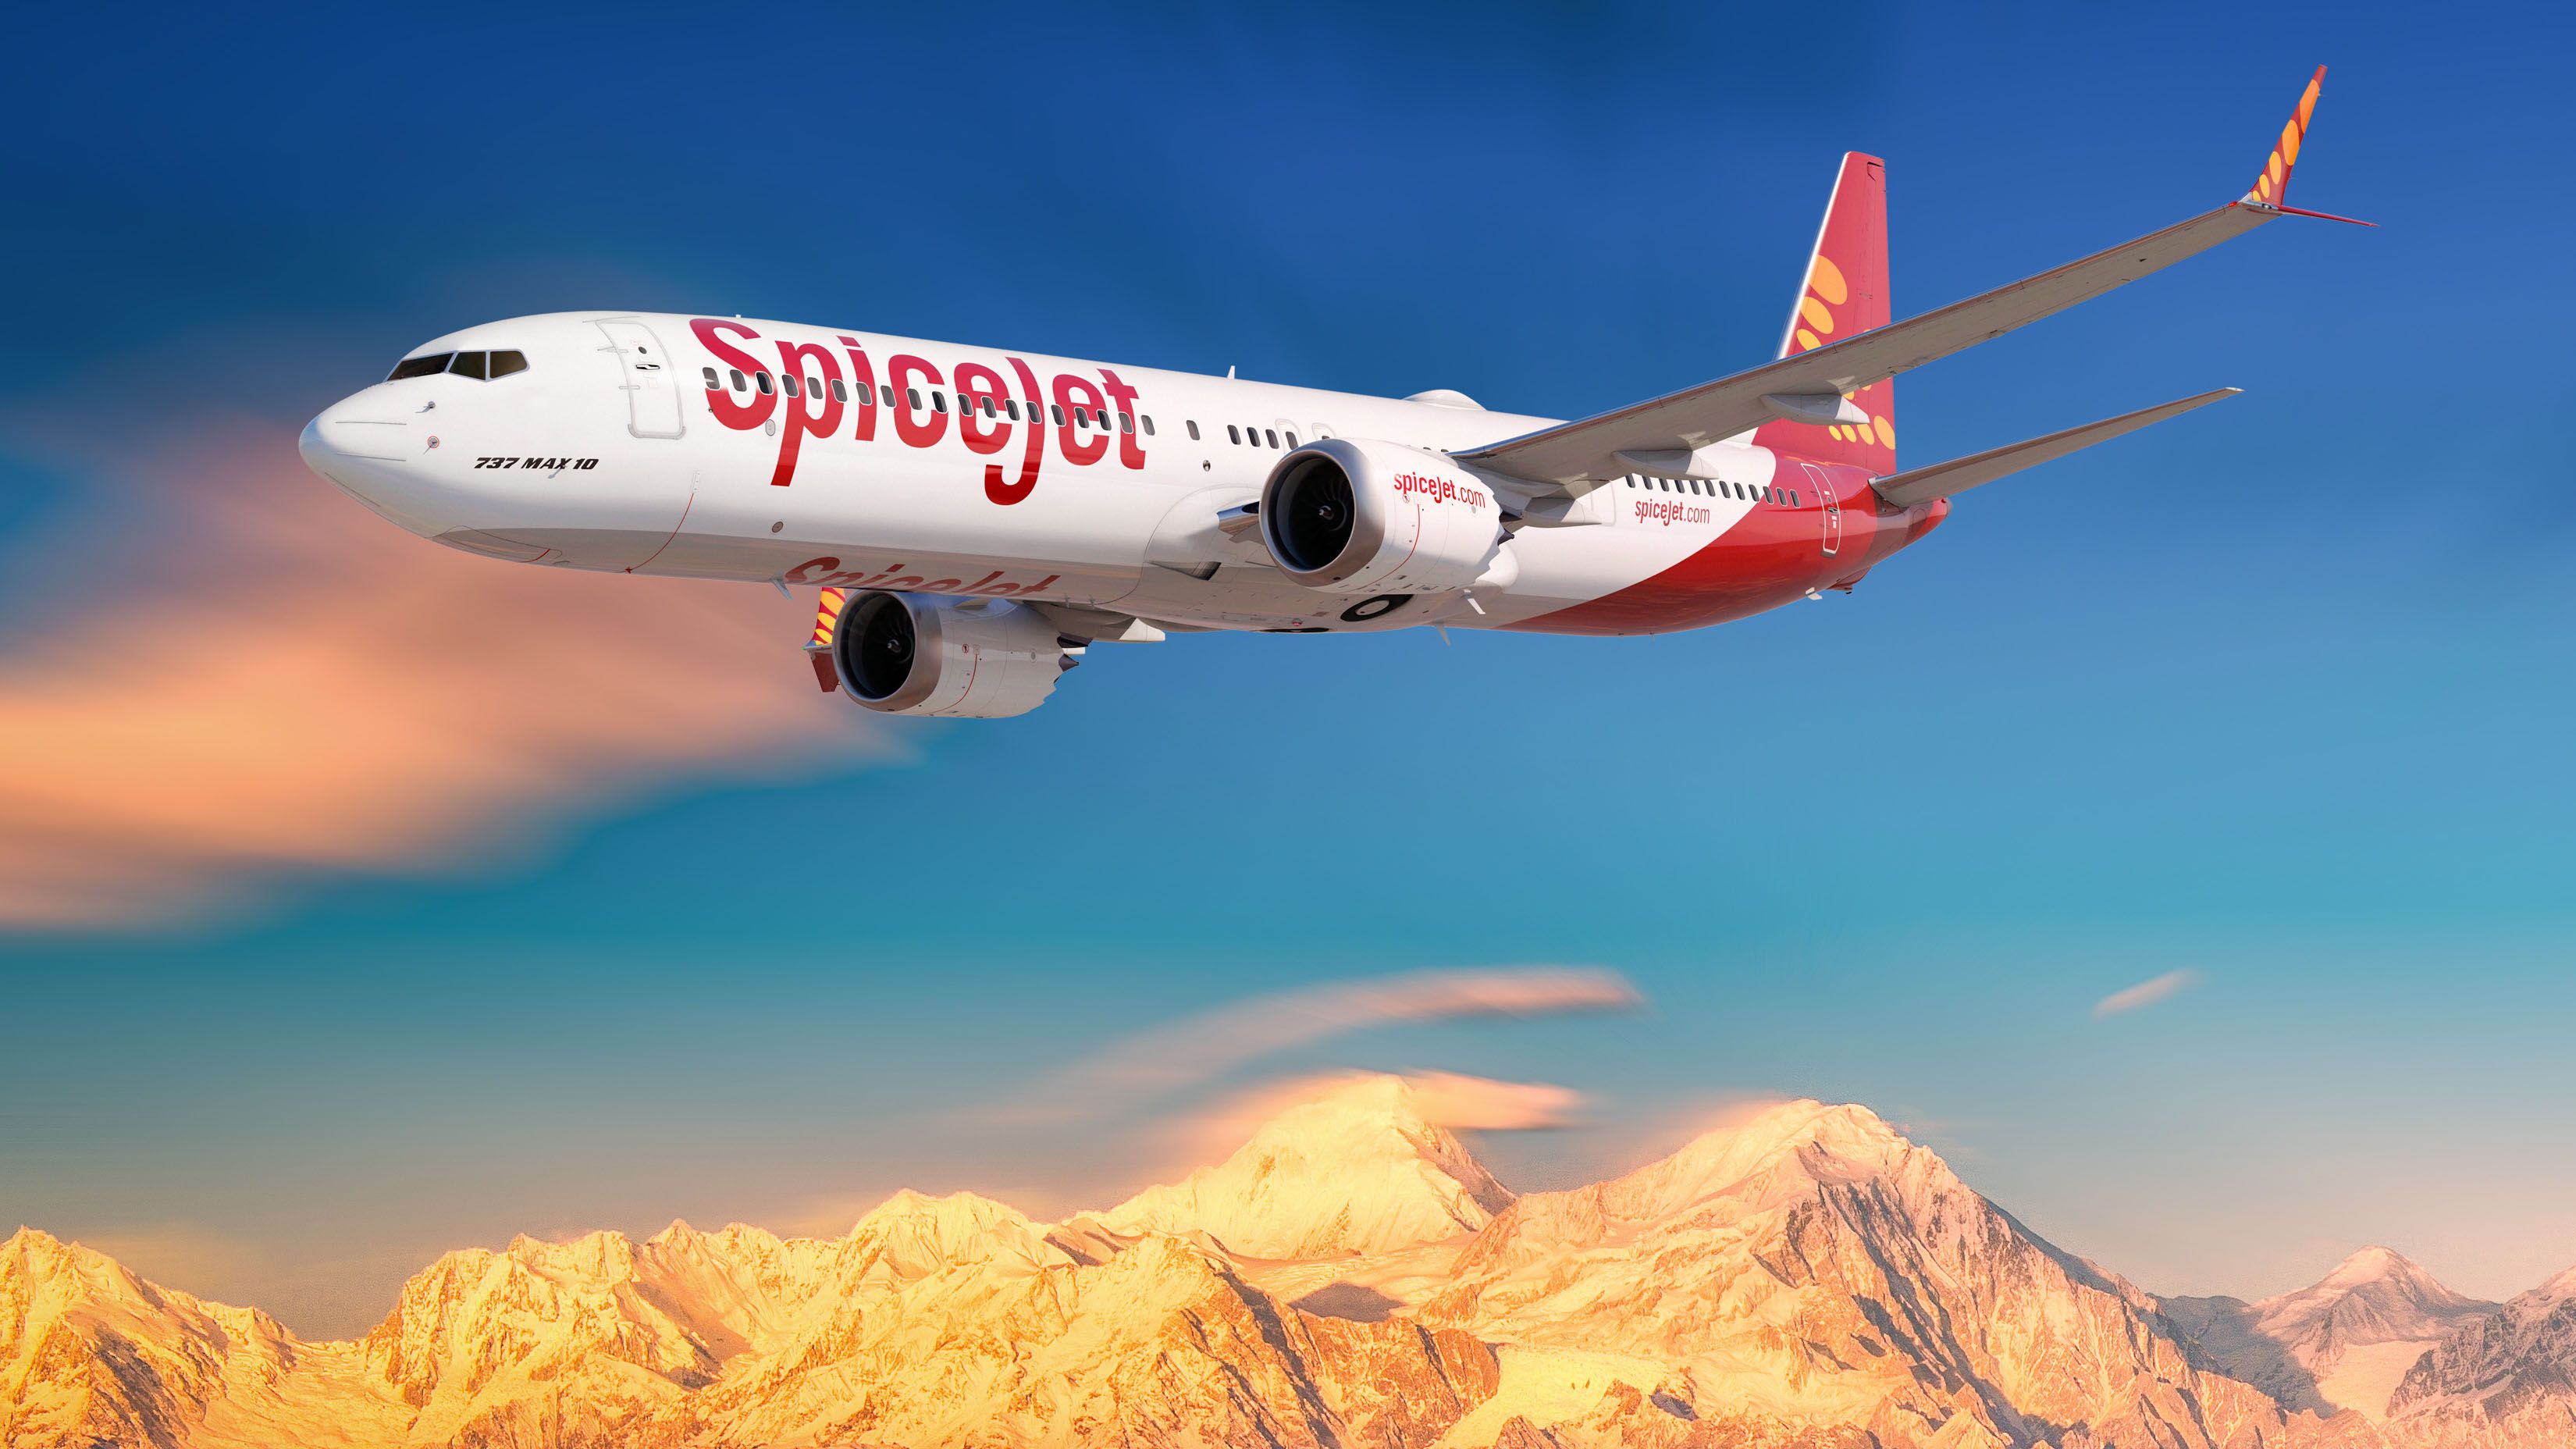 SpiceJet Boeing 737 MAX aircraft